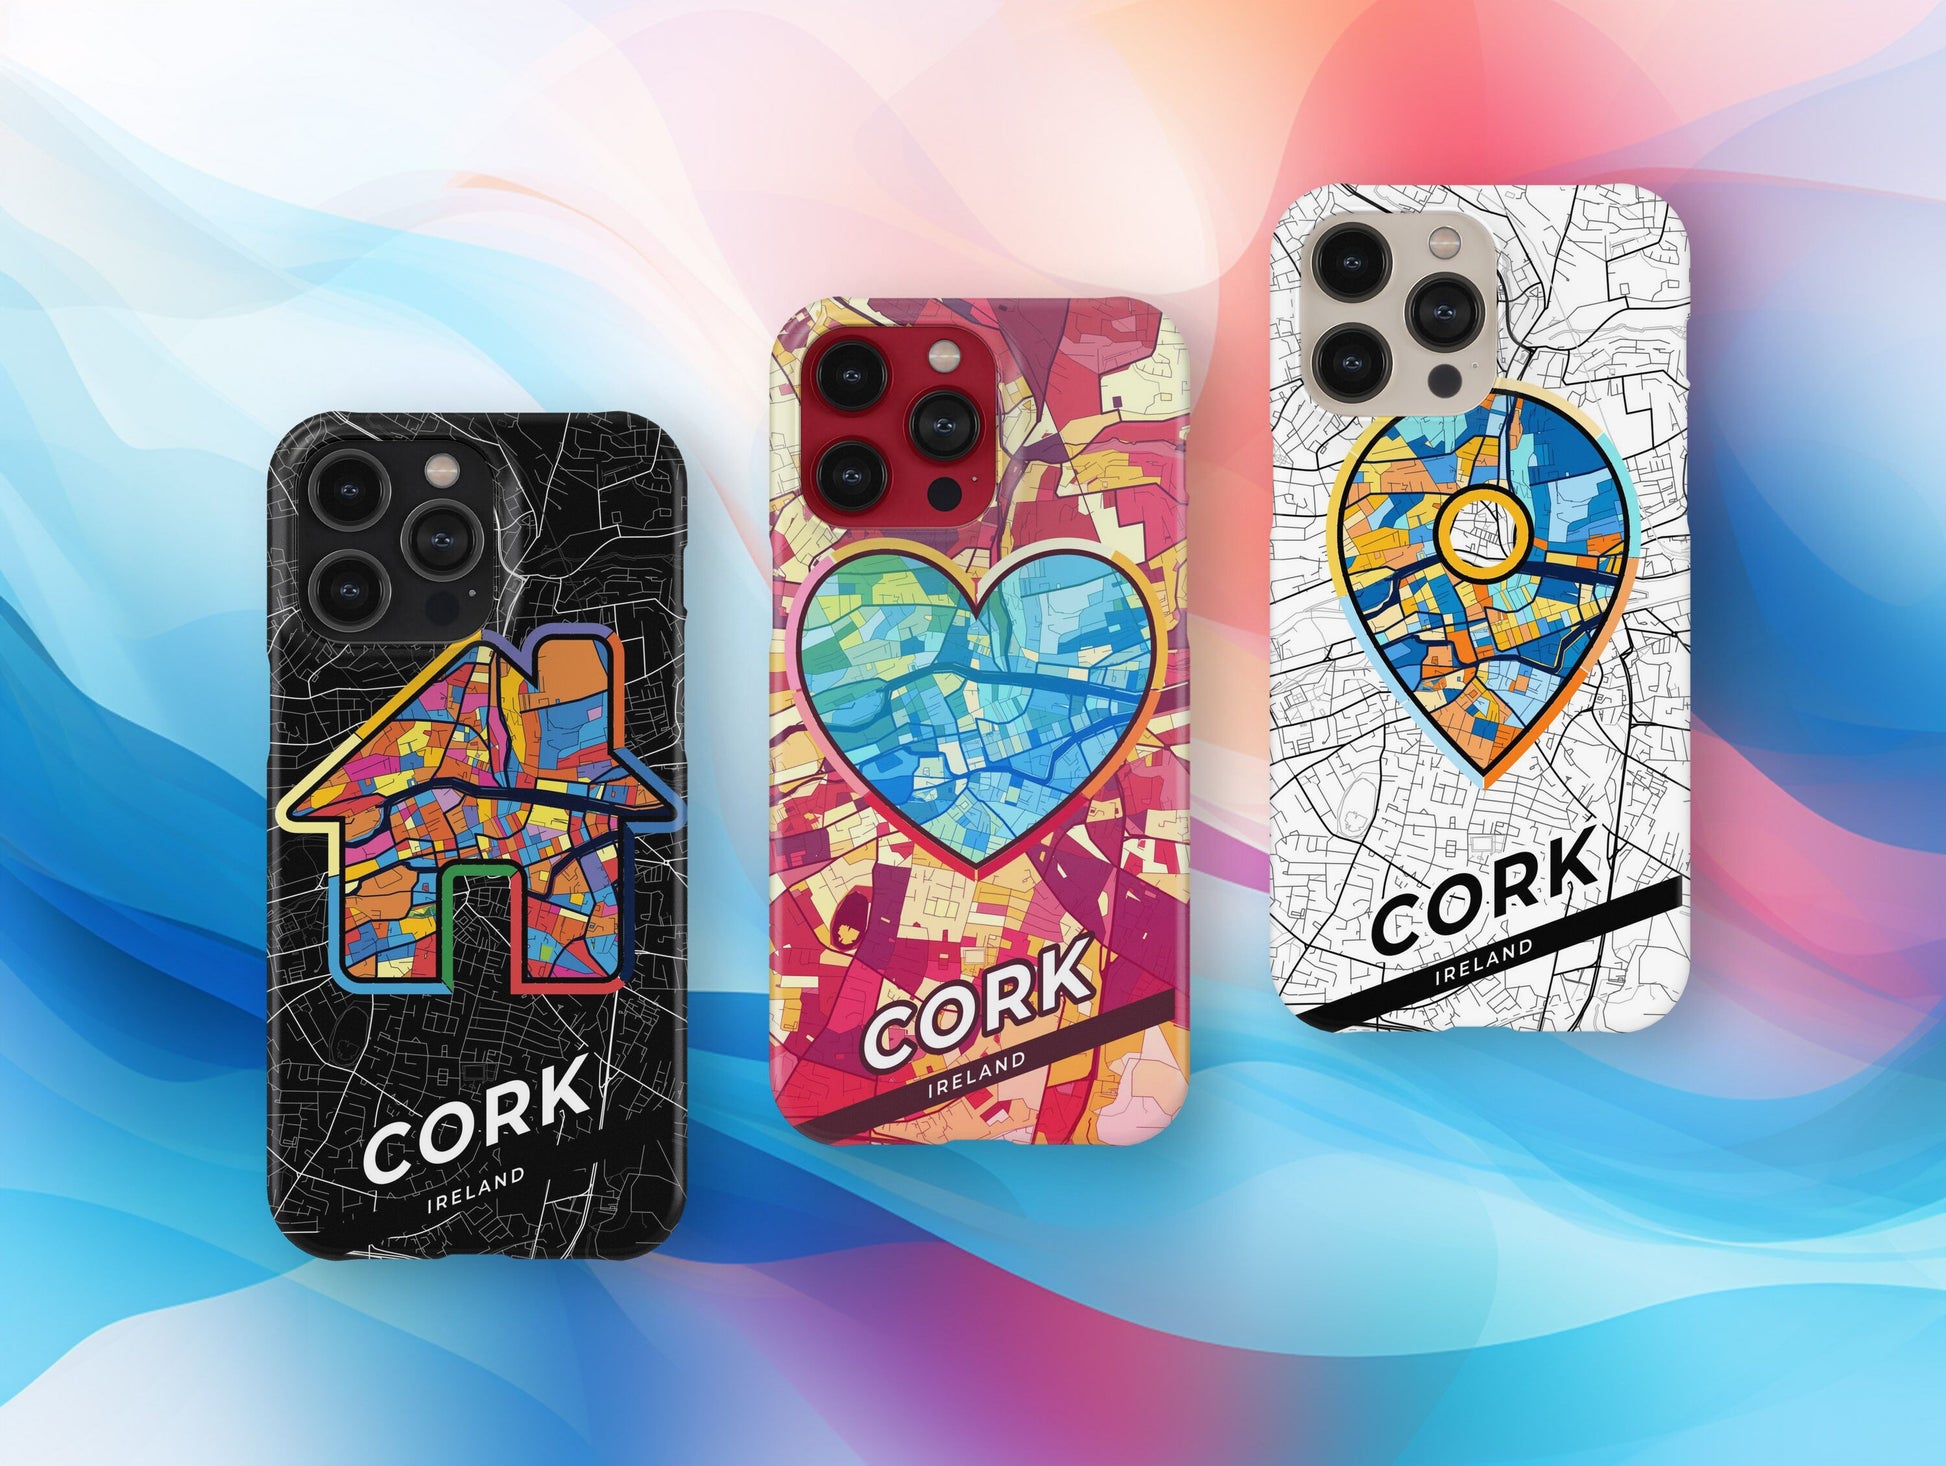 Cork Ireland slim phone case with colorful icon. Birthday, wedding or housewarming gift. Couple match cases.